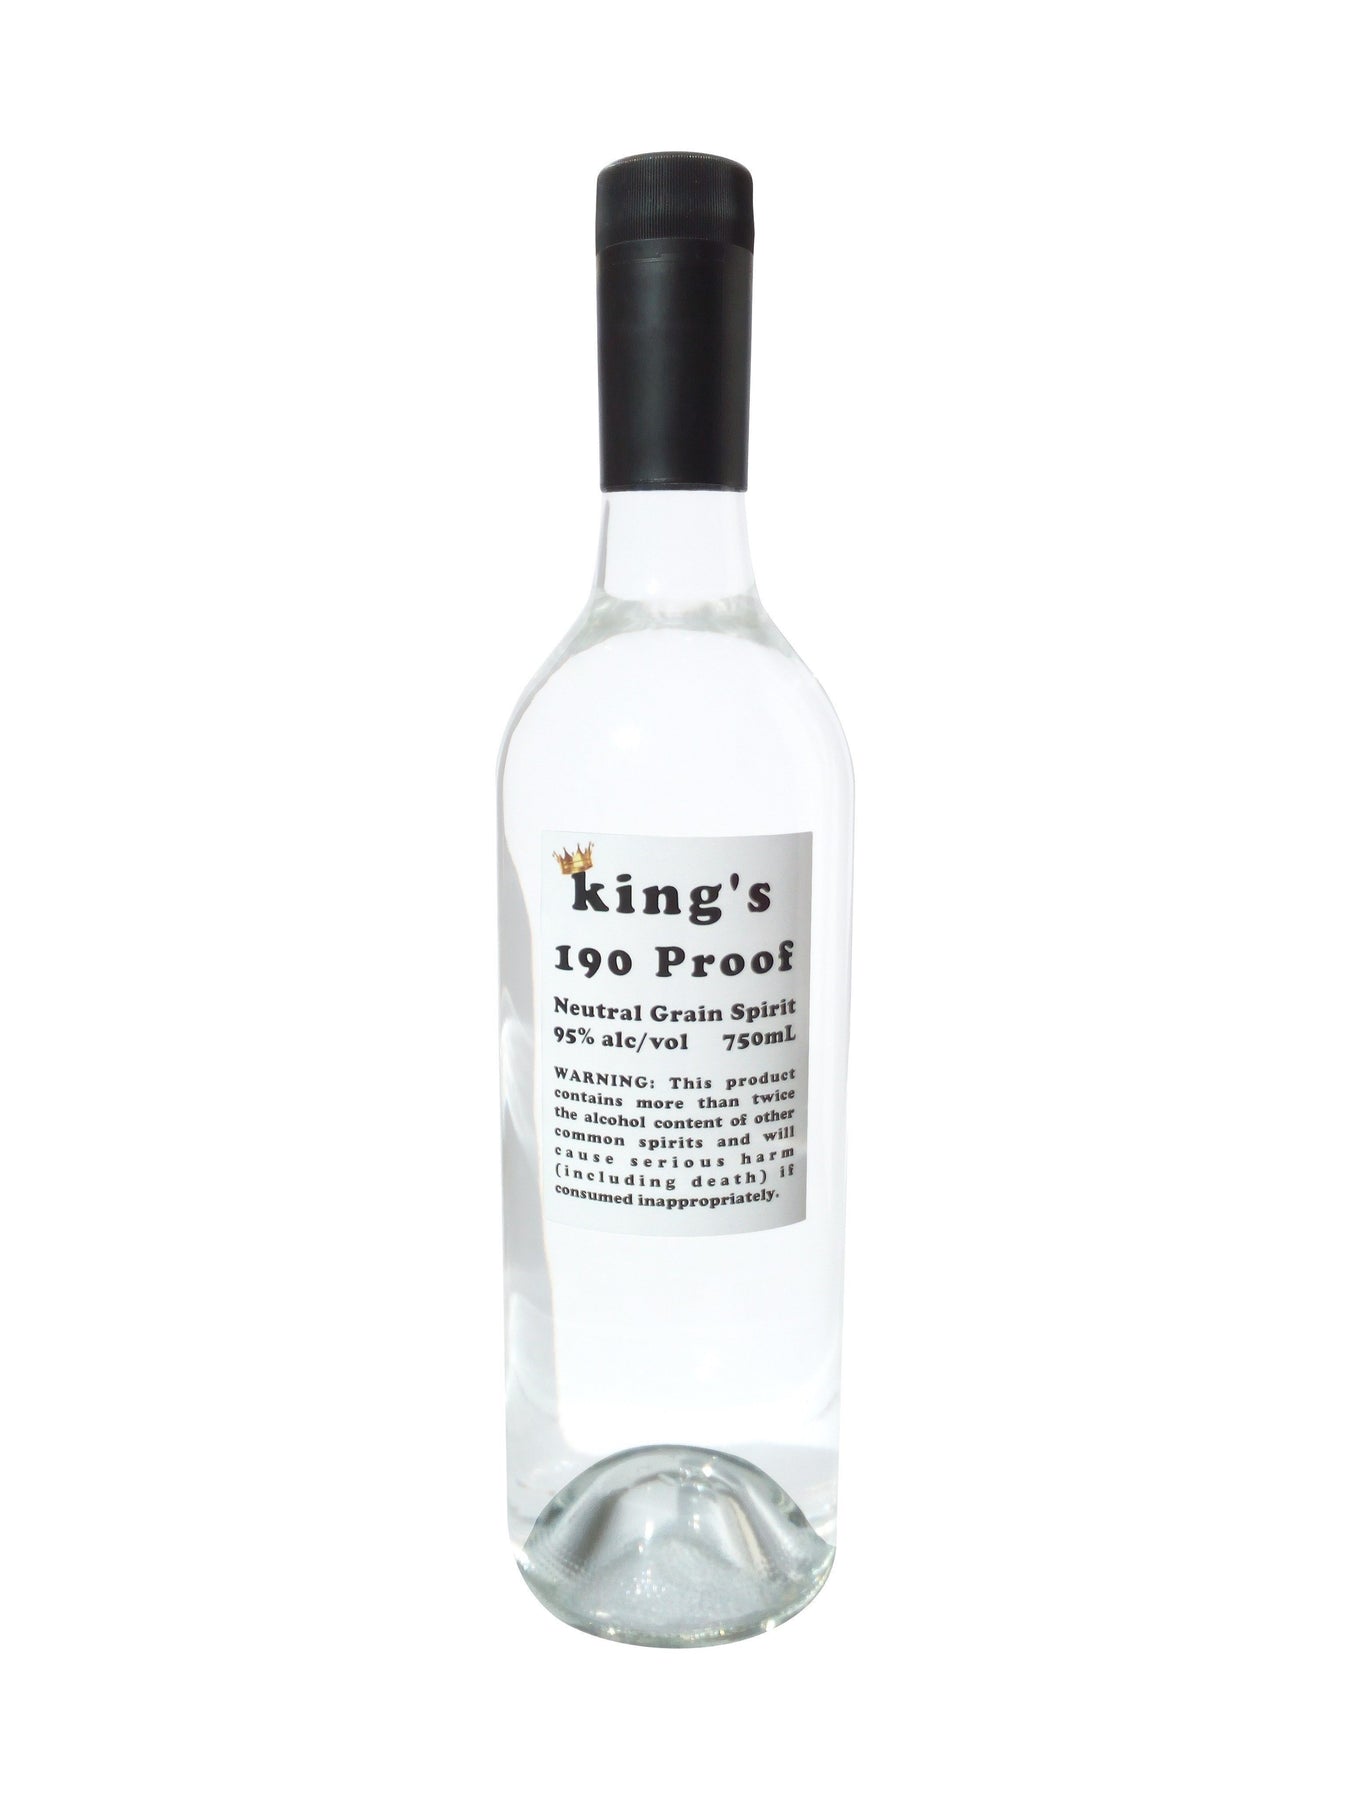 King's 190 Proof